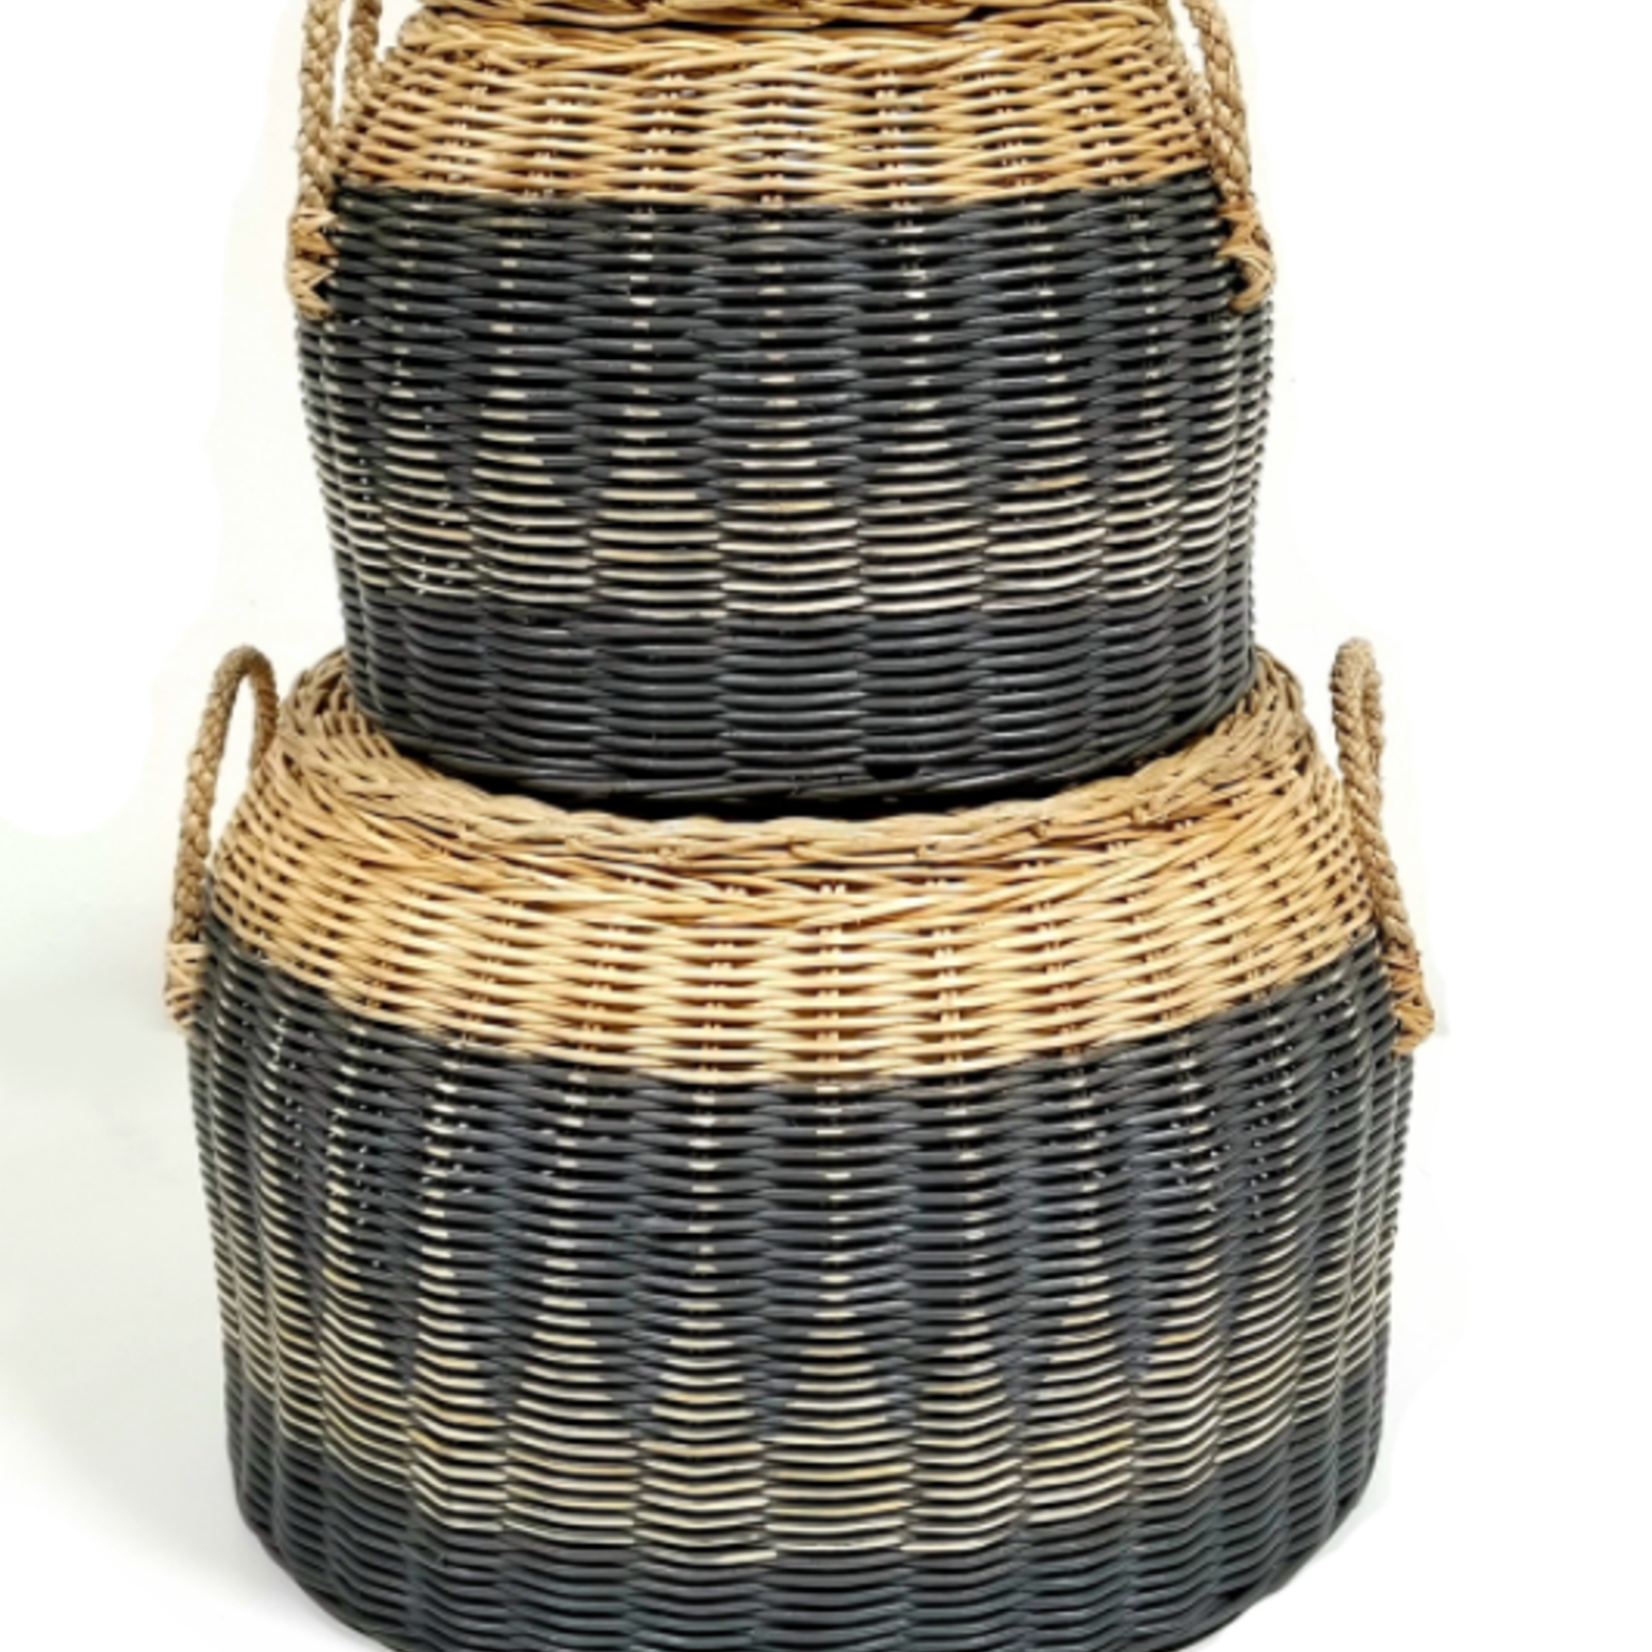 Set of 2 Lidded Round Basket W/ Straw Handles Grey Wash and Natural